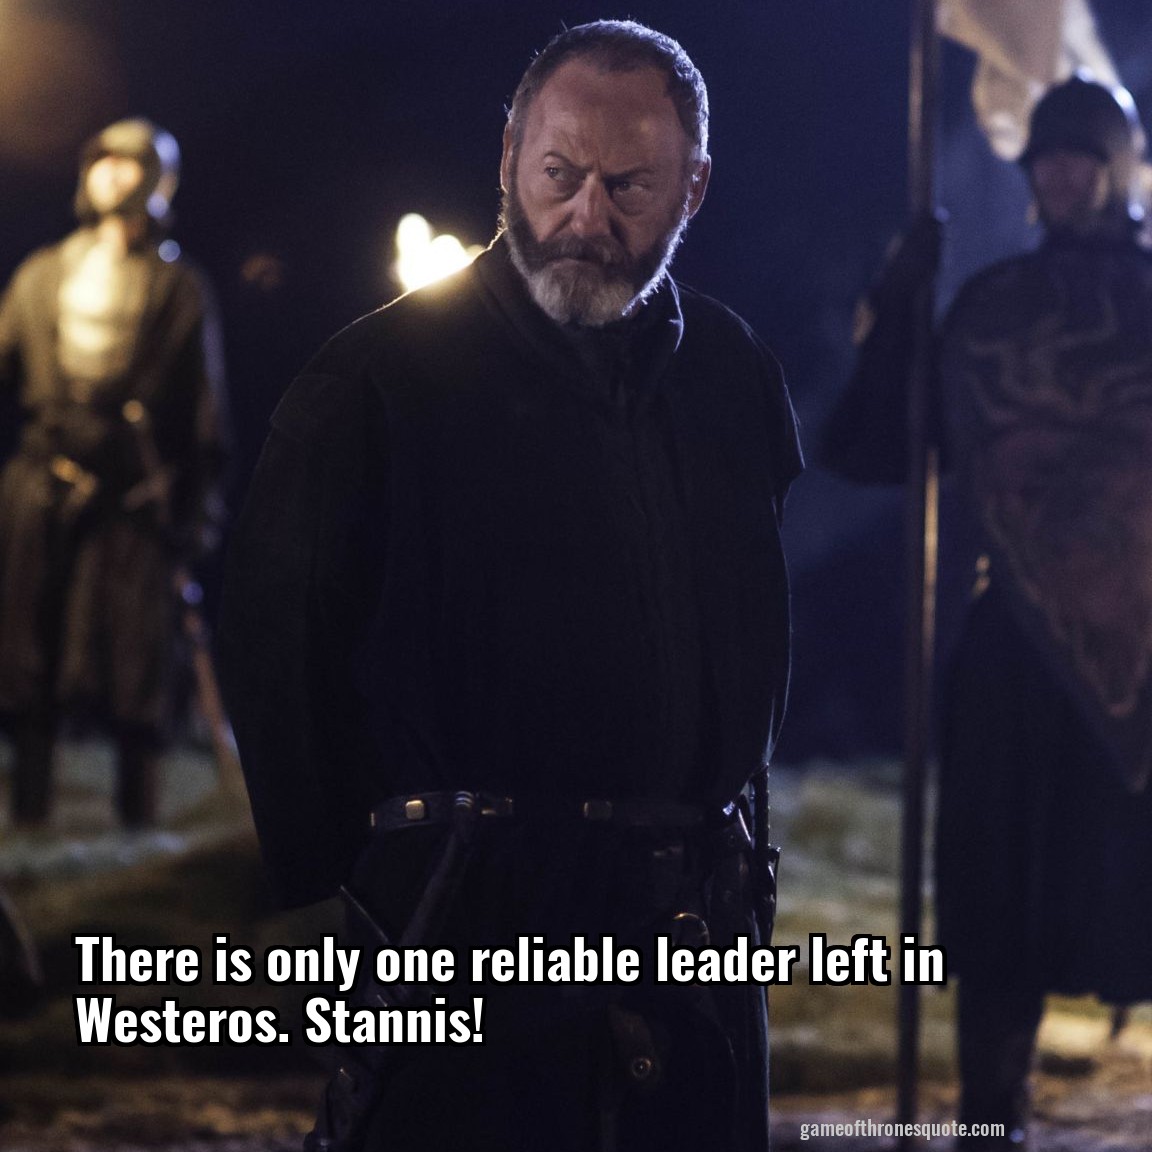 There is only one reliable leader left in Westeros. Stannis!